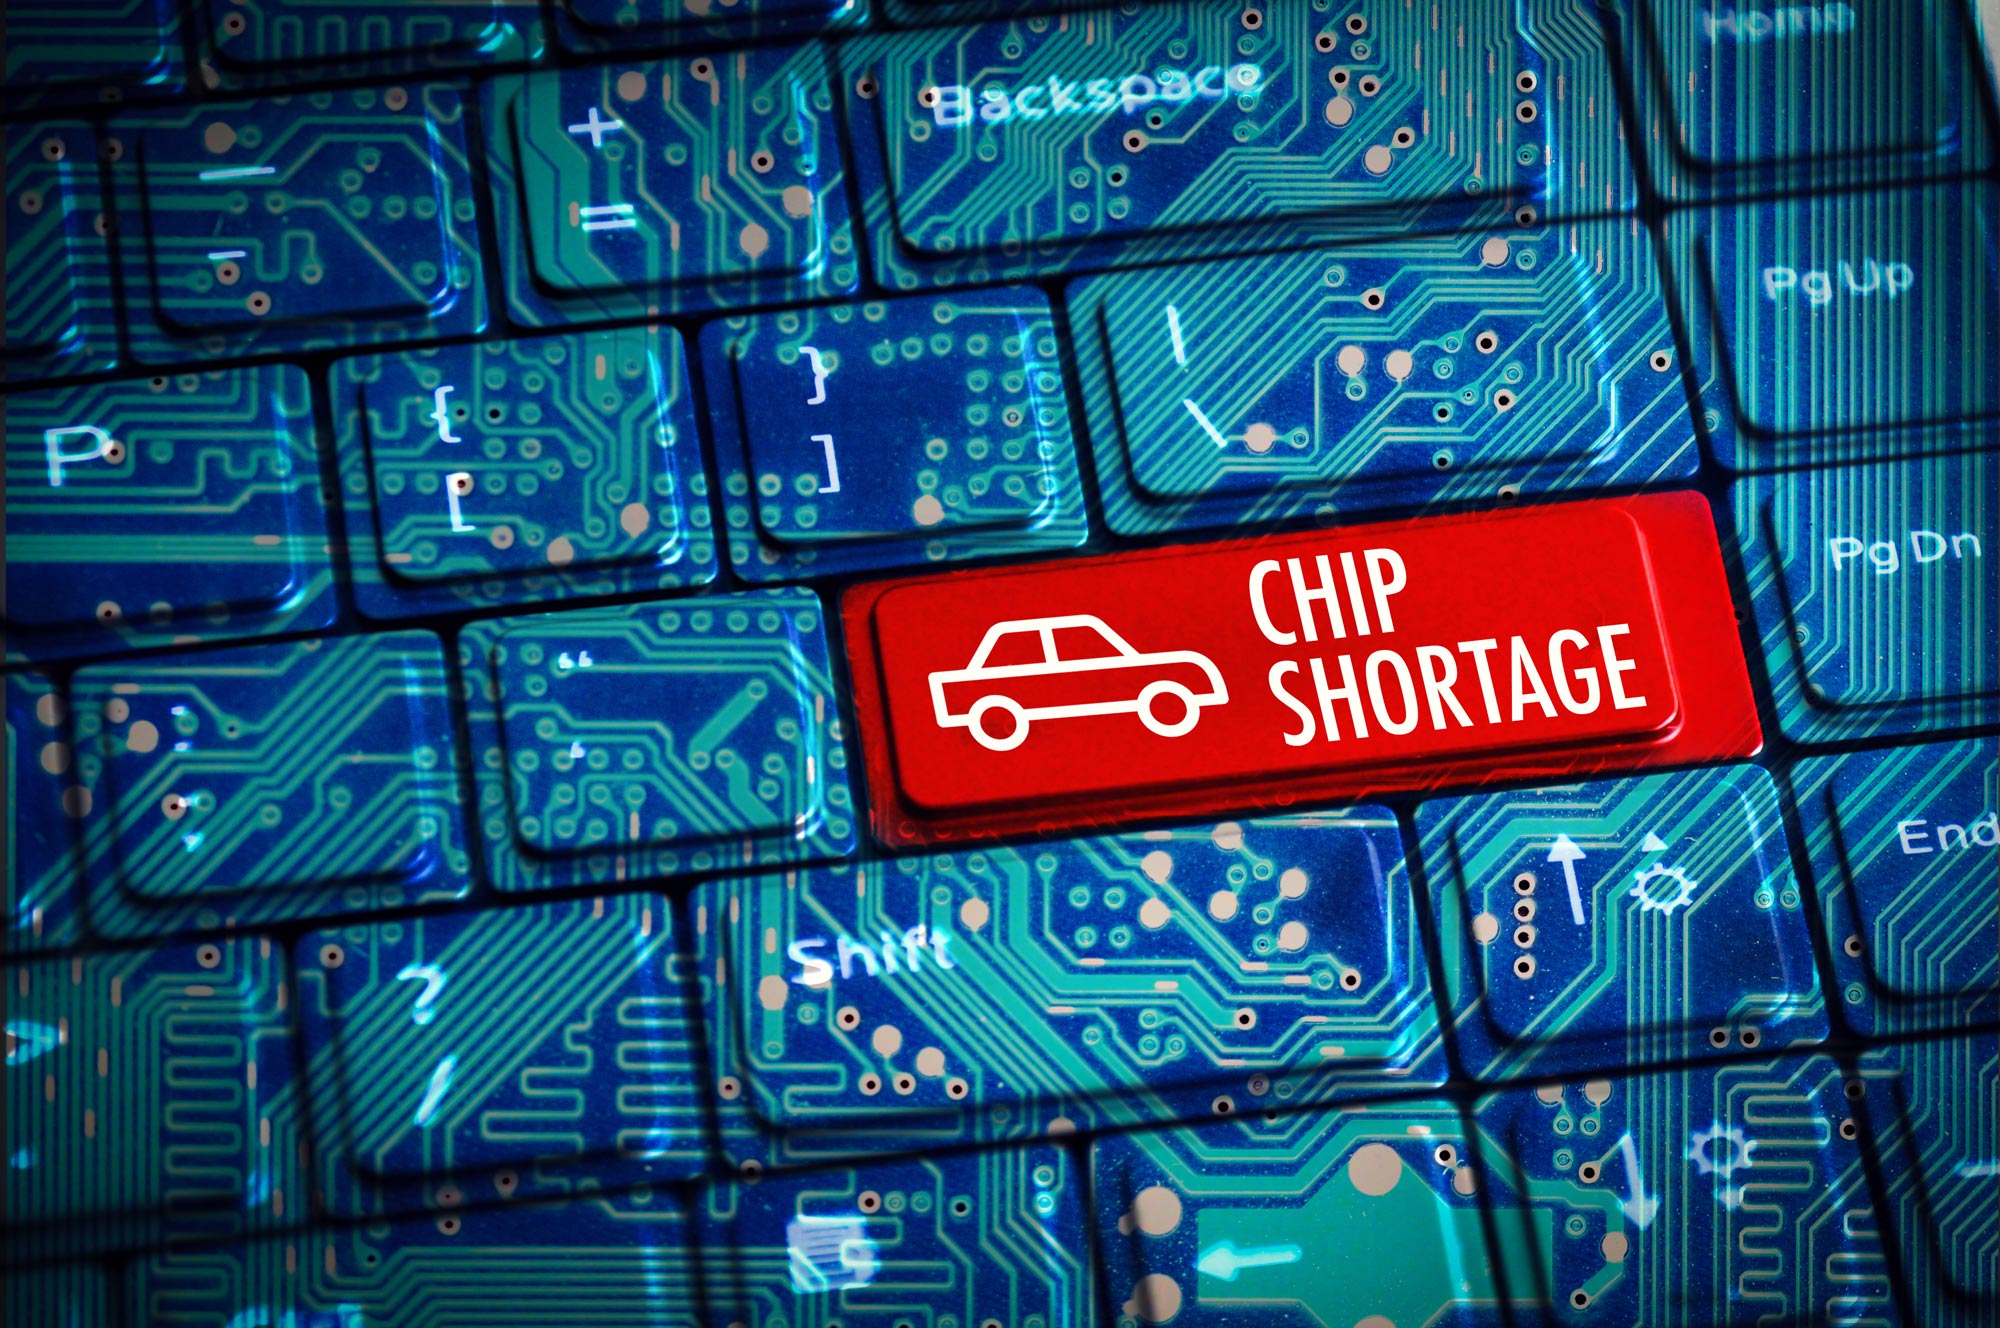 Red semiconductor chip shortage sign illustrated over a motherboard on a keyboard